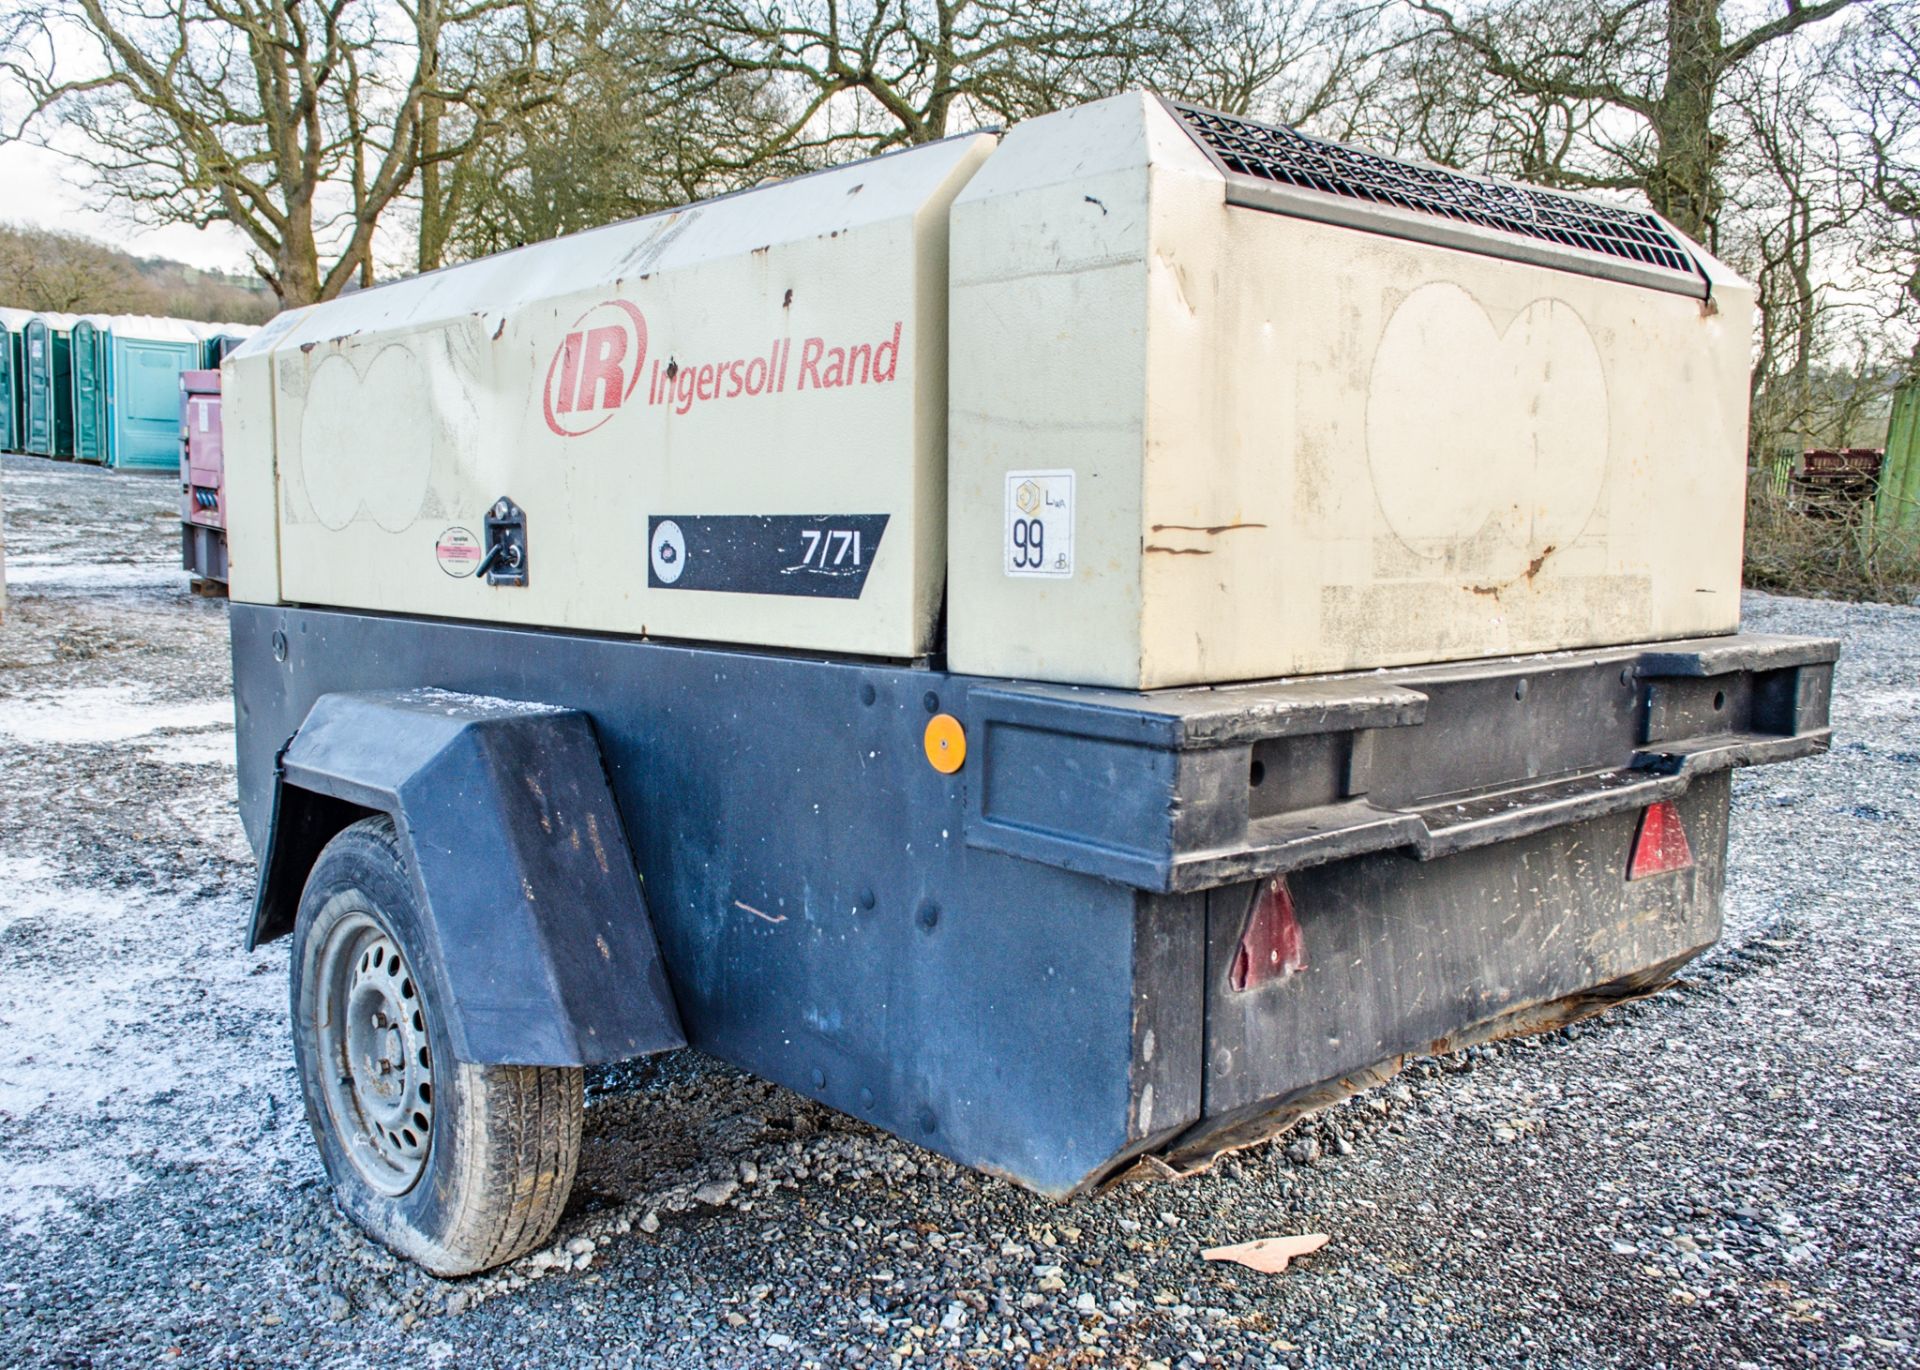 Ingersoll Rand 7/71 diesel driven air compressor Year: 2006 S/N: 521720 Recorded Hours: 3503 - Image 2 of 6